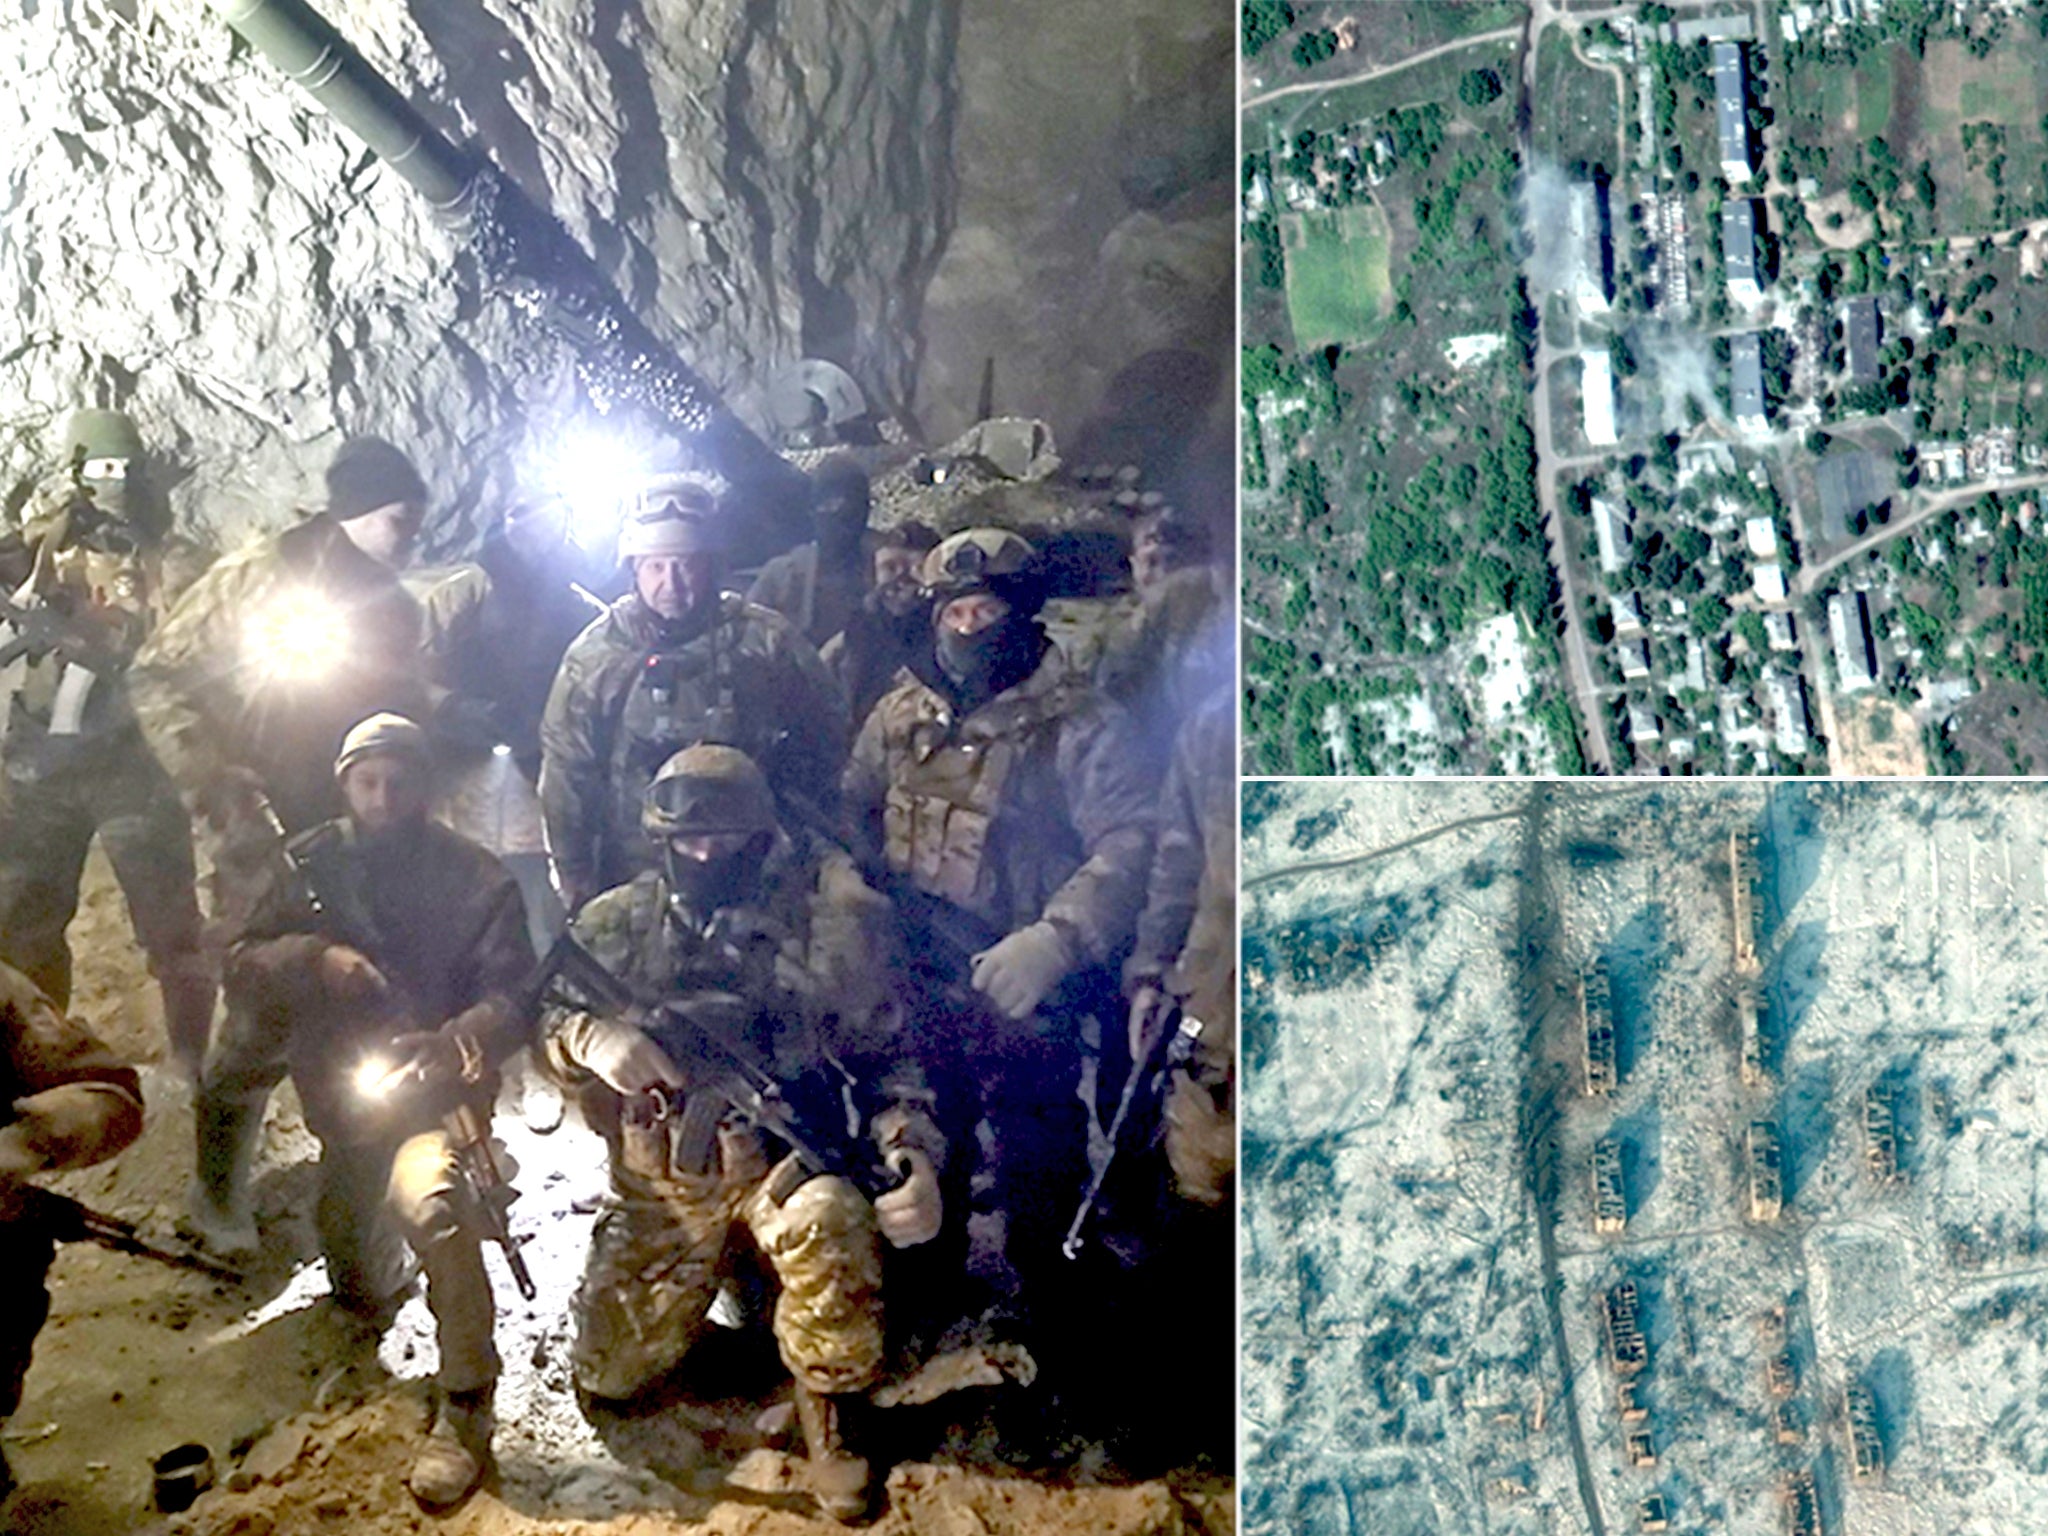 Wagner troops and the mercenary group’s chief Yevgeny Prigozhin, alongside a satellite image of the destruction wrought on Soledar